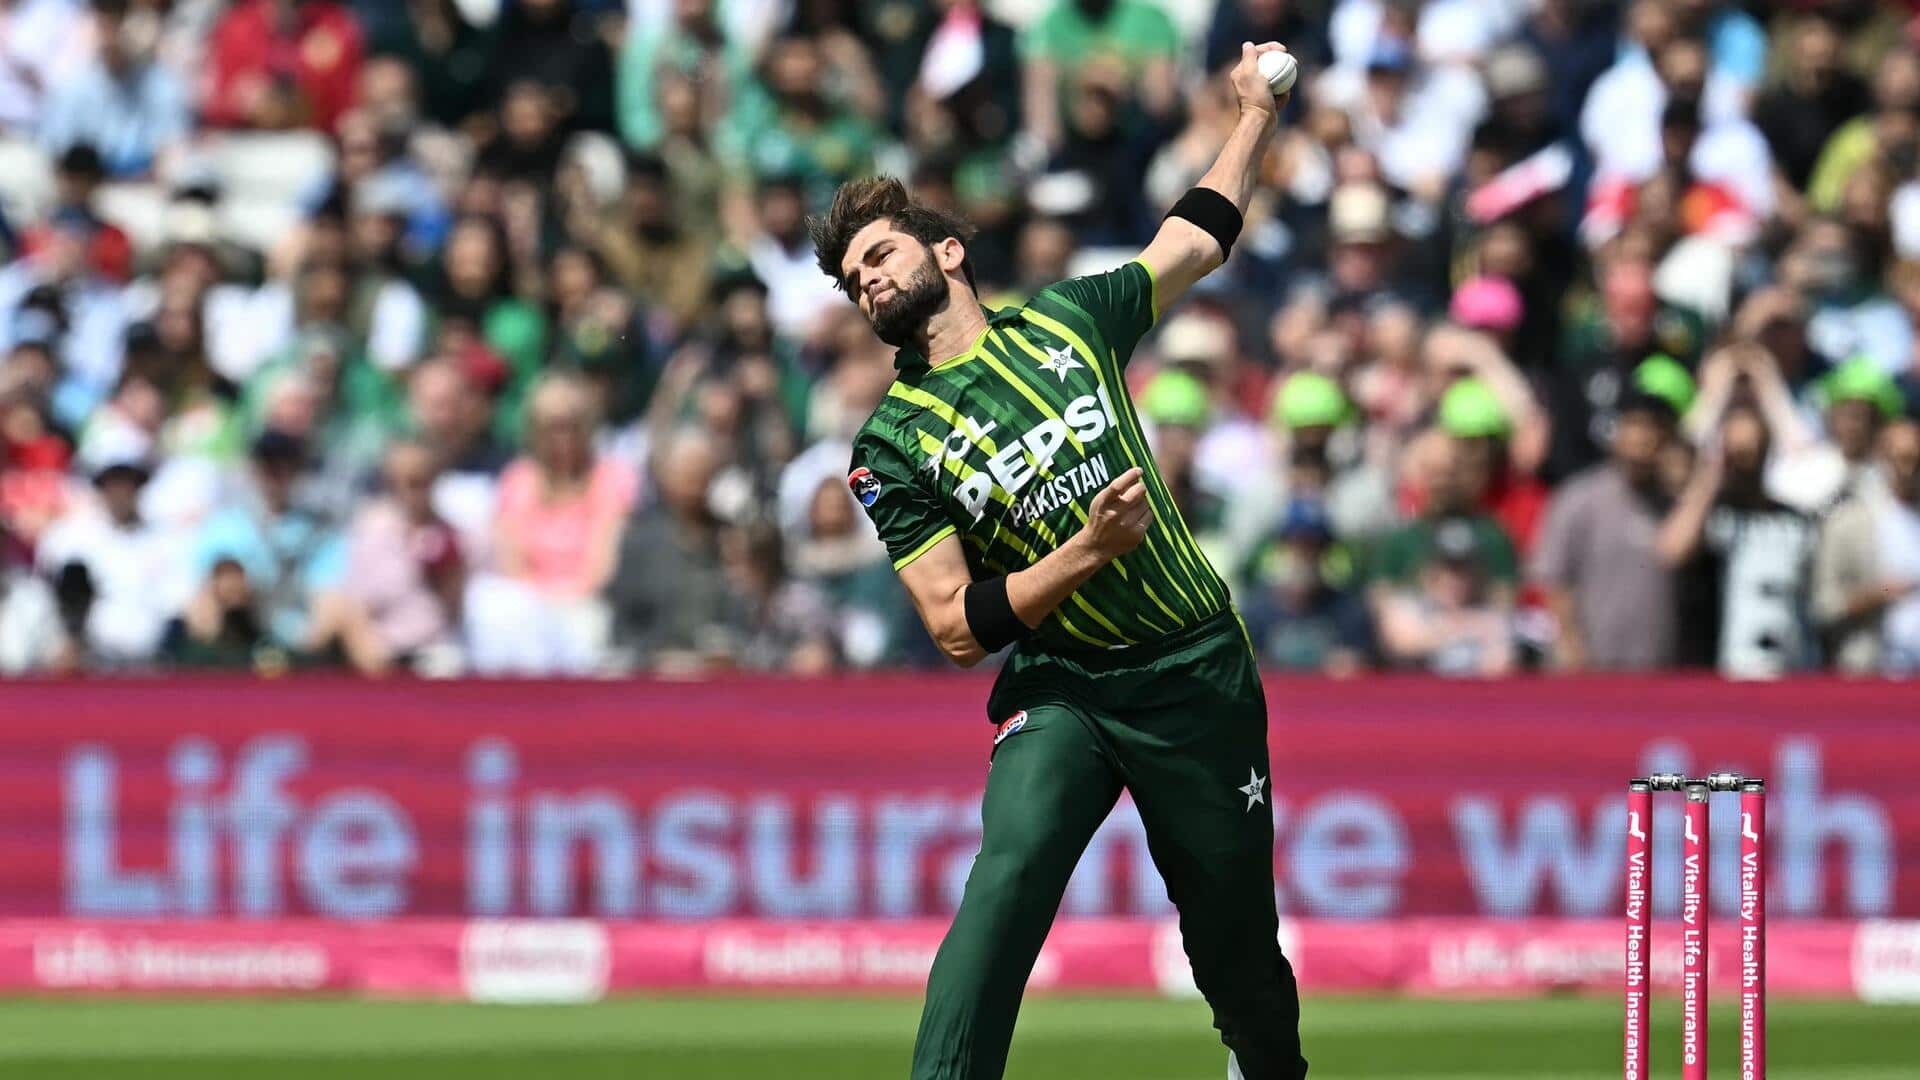 2nd T20I, Shaheen Afridi shines with 3/36 versus England: Stats